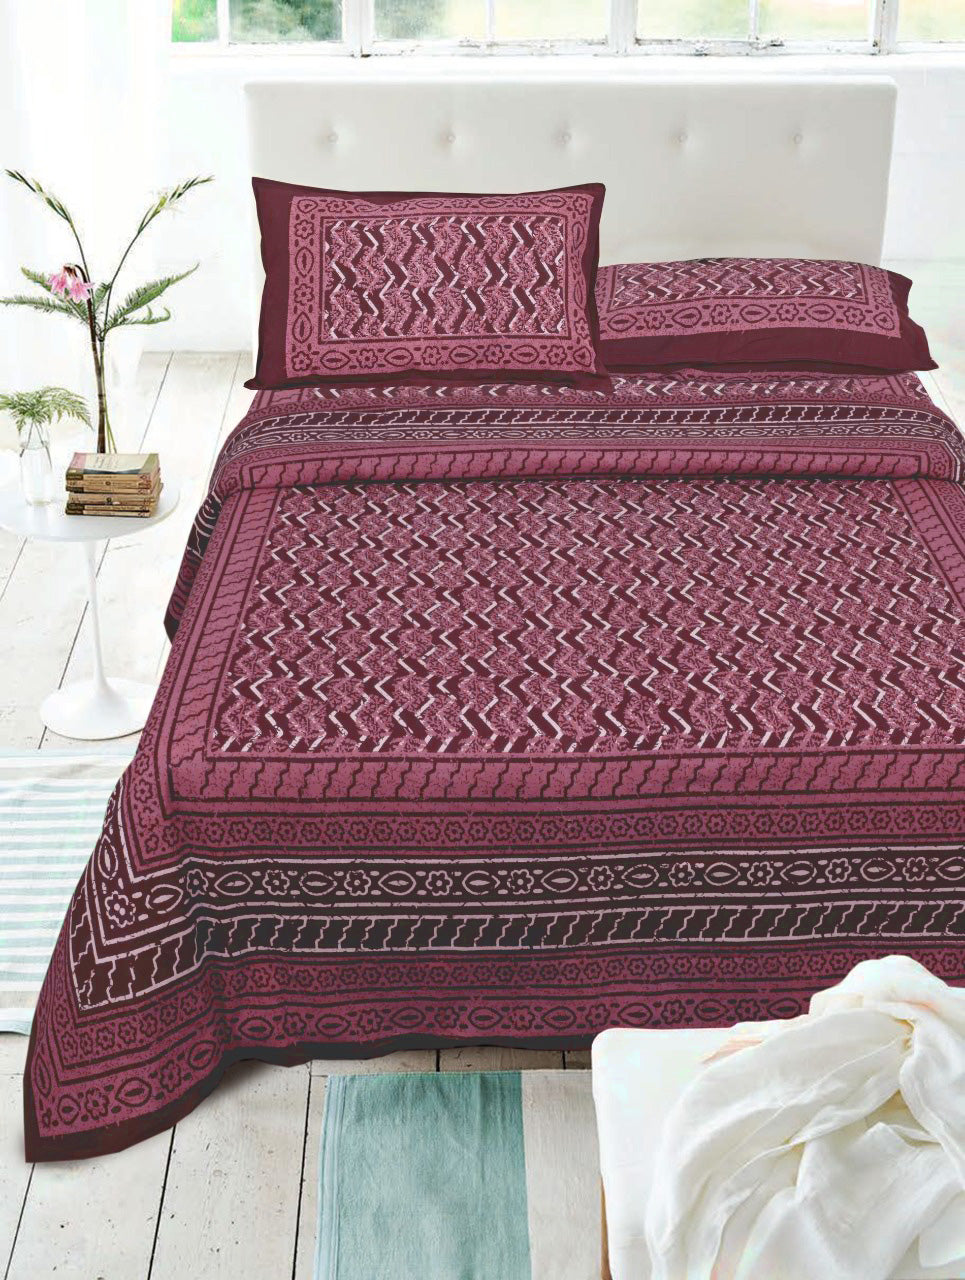 Maroon Dabu Handblock Printed Bed Cover with Pillow covers